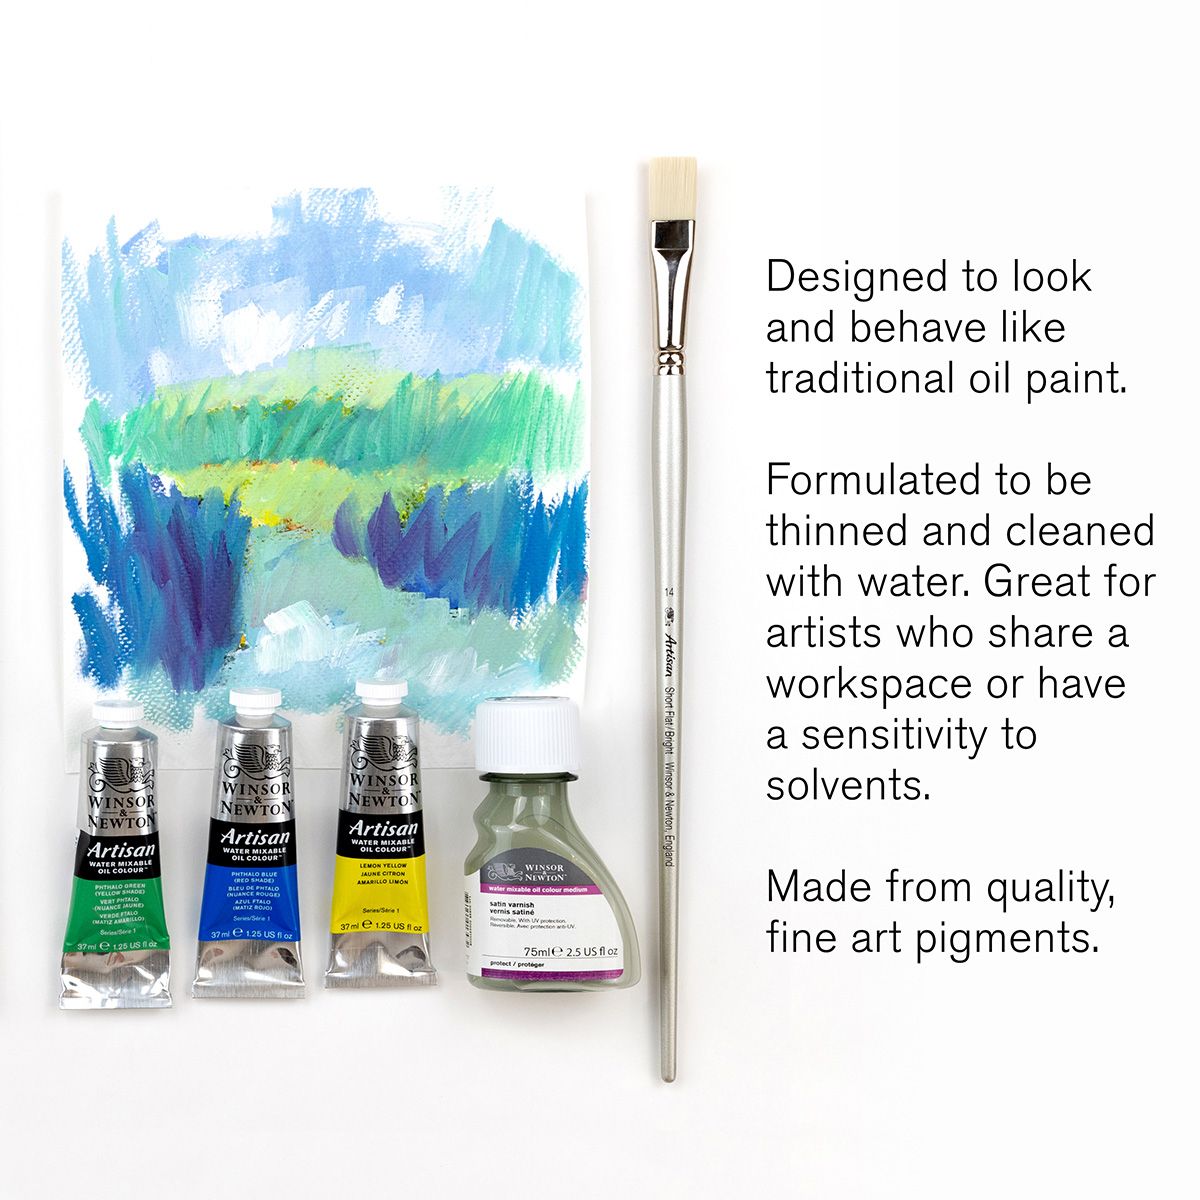 Designed to look and work just like traditional oil paint